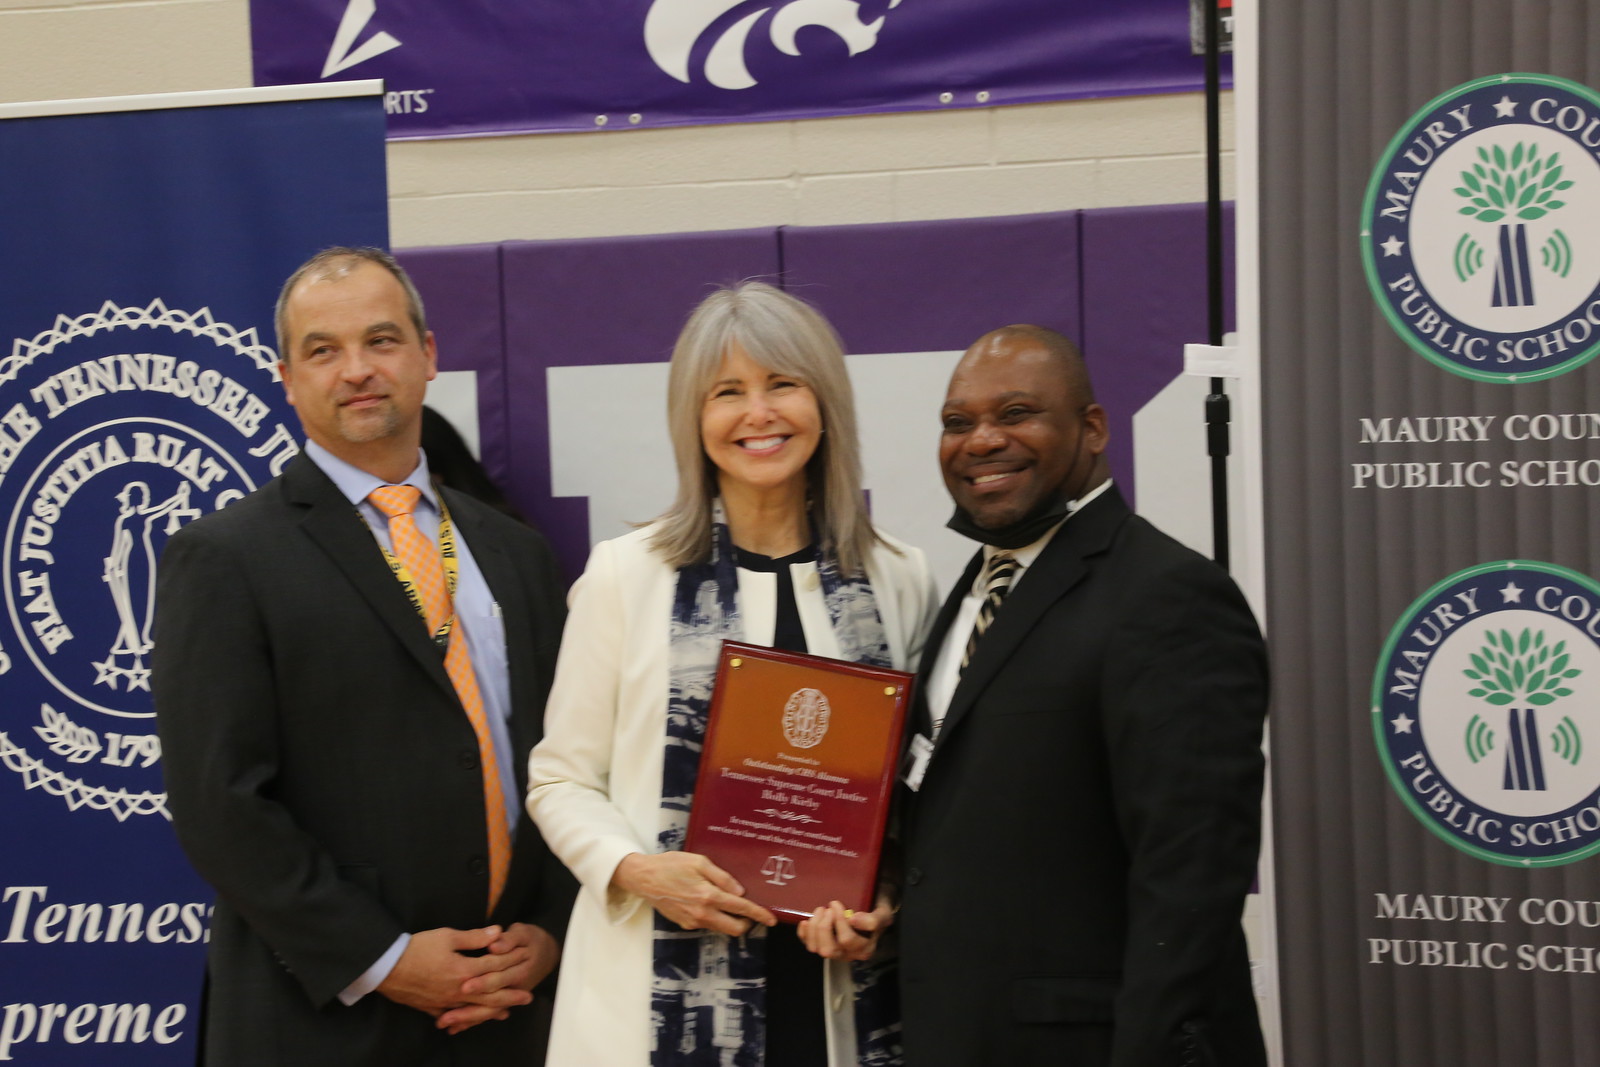 Maury County Schools Superintendent Michael Hickman, Justice Holly Kirby, and Columbia Central High School Principal Kevin Eady